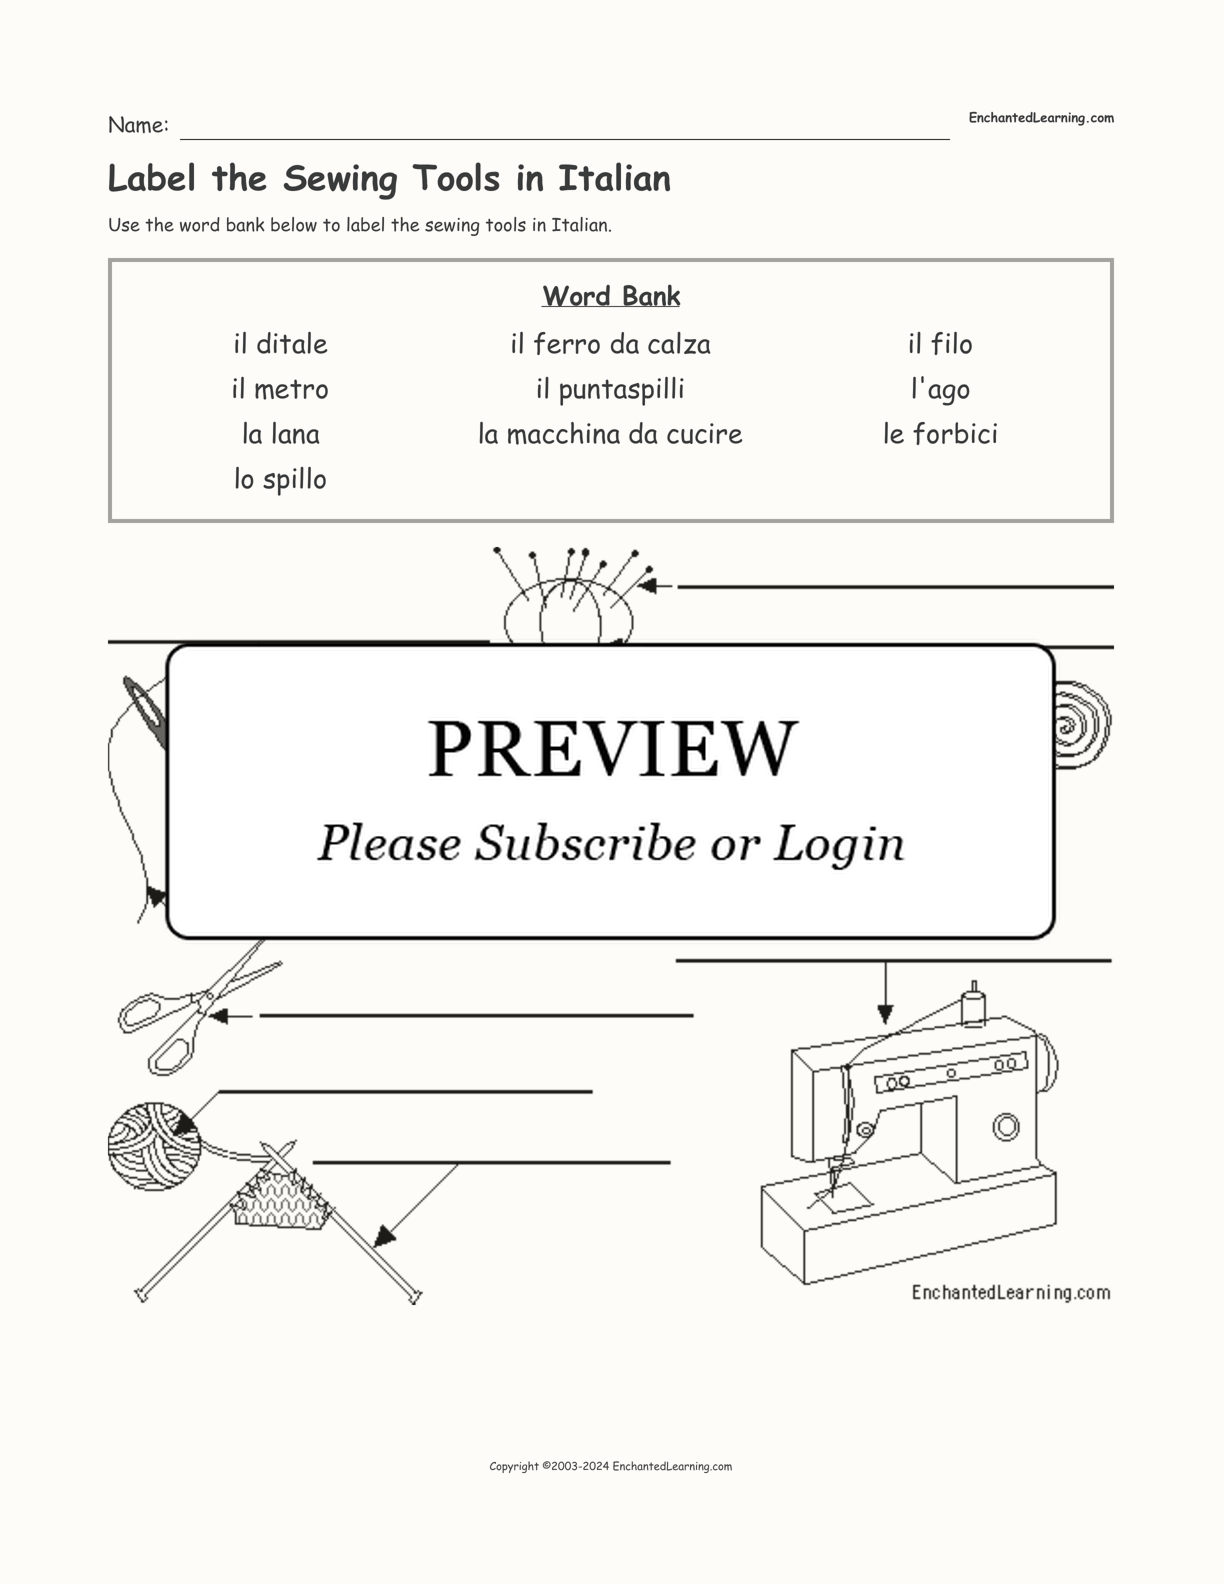 Label the Sewing Tools in Italian interactive worksheet page 1